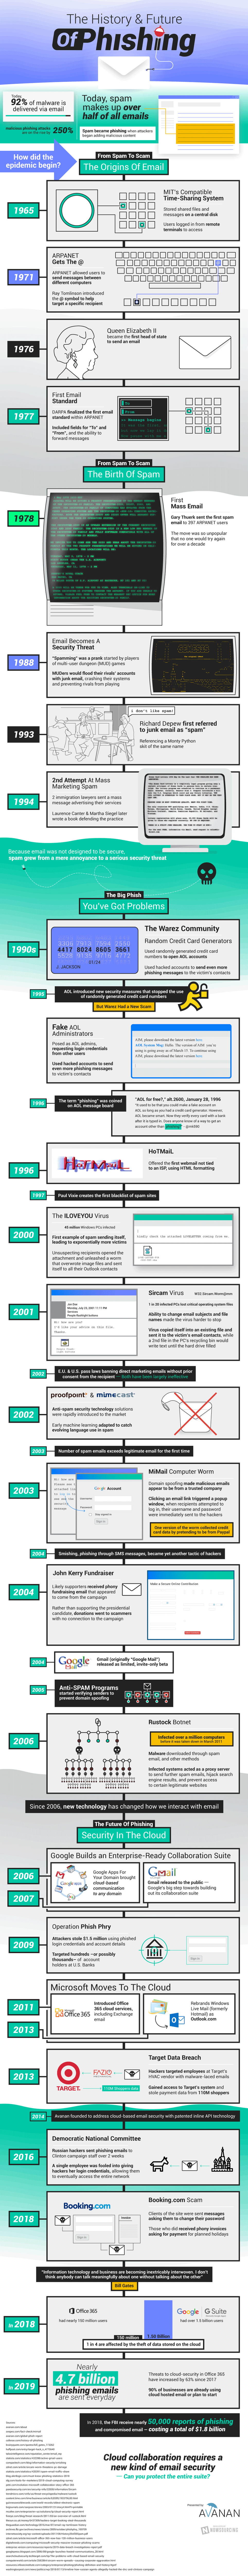 The History and Future of Phishing [infographic]